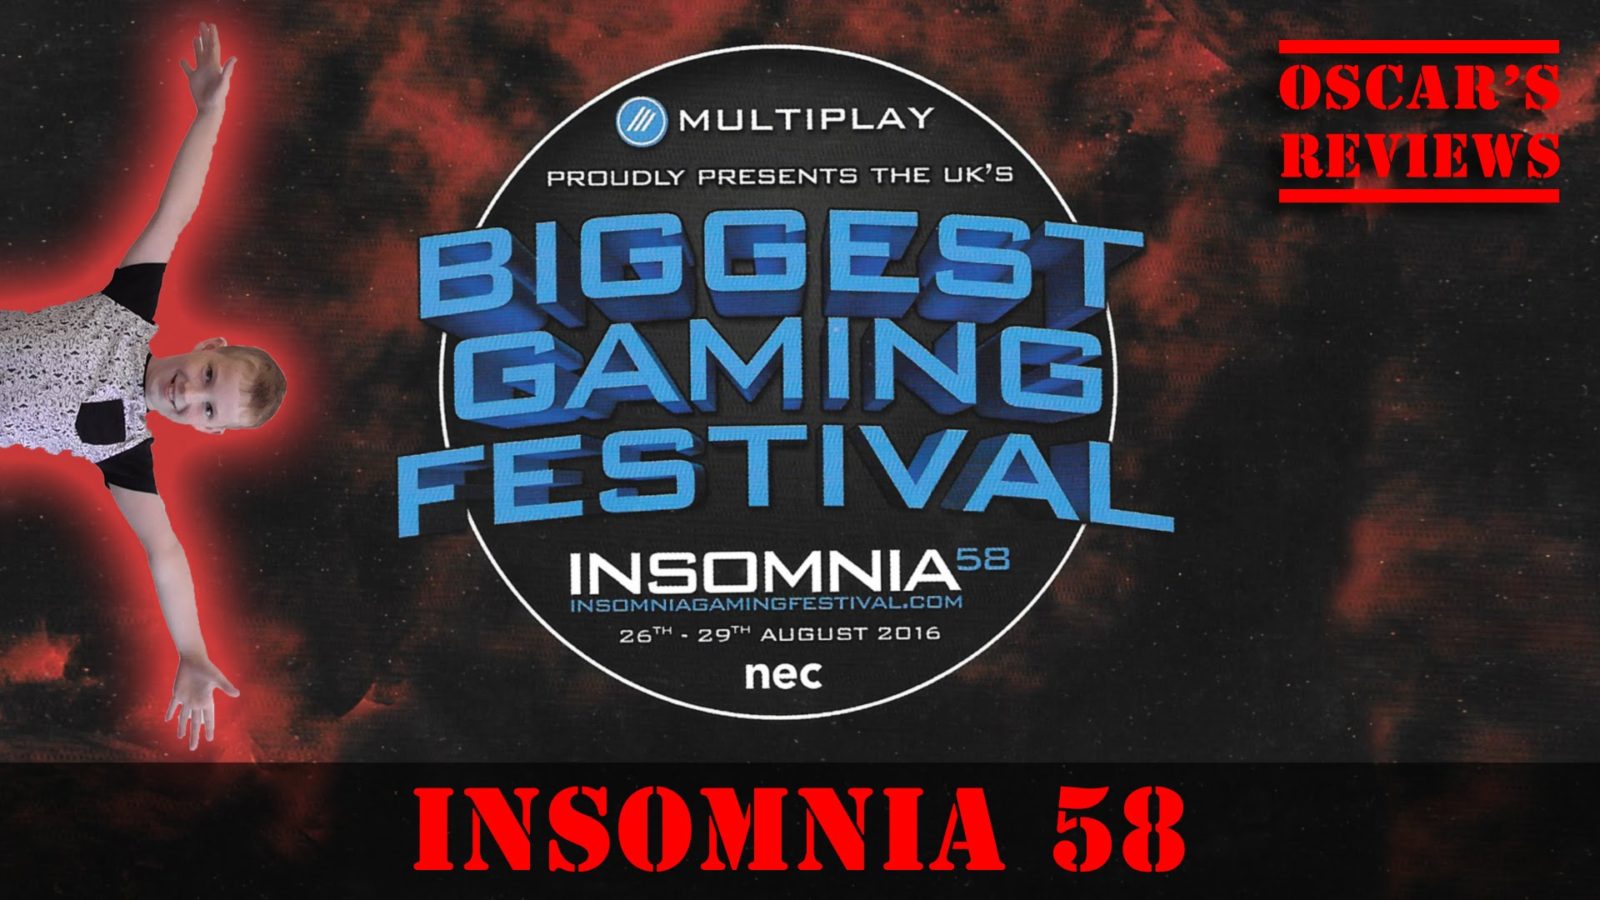 Insomnia 58 Gaming Festival – Sunday Highlights: Tomohawk, Bigbst4tz2, Robot Wars, Roblox and More